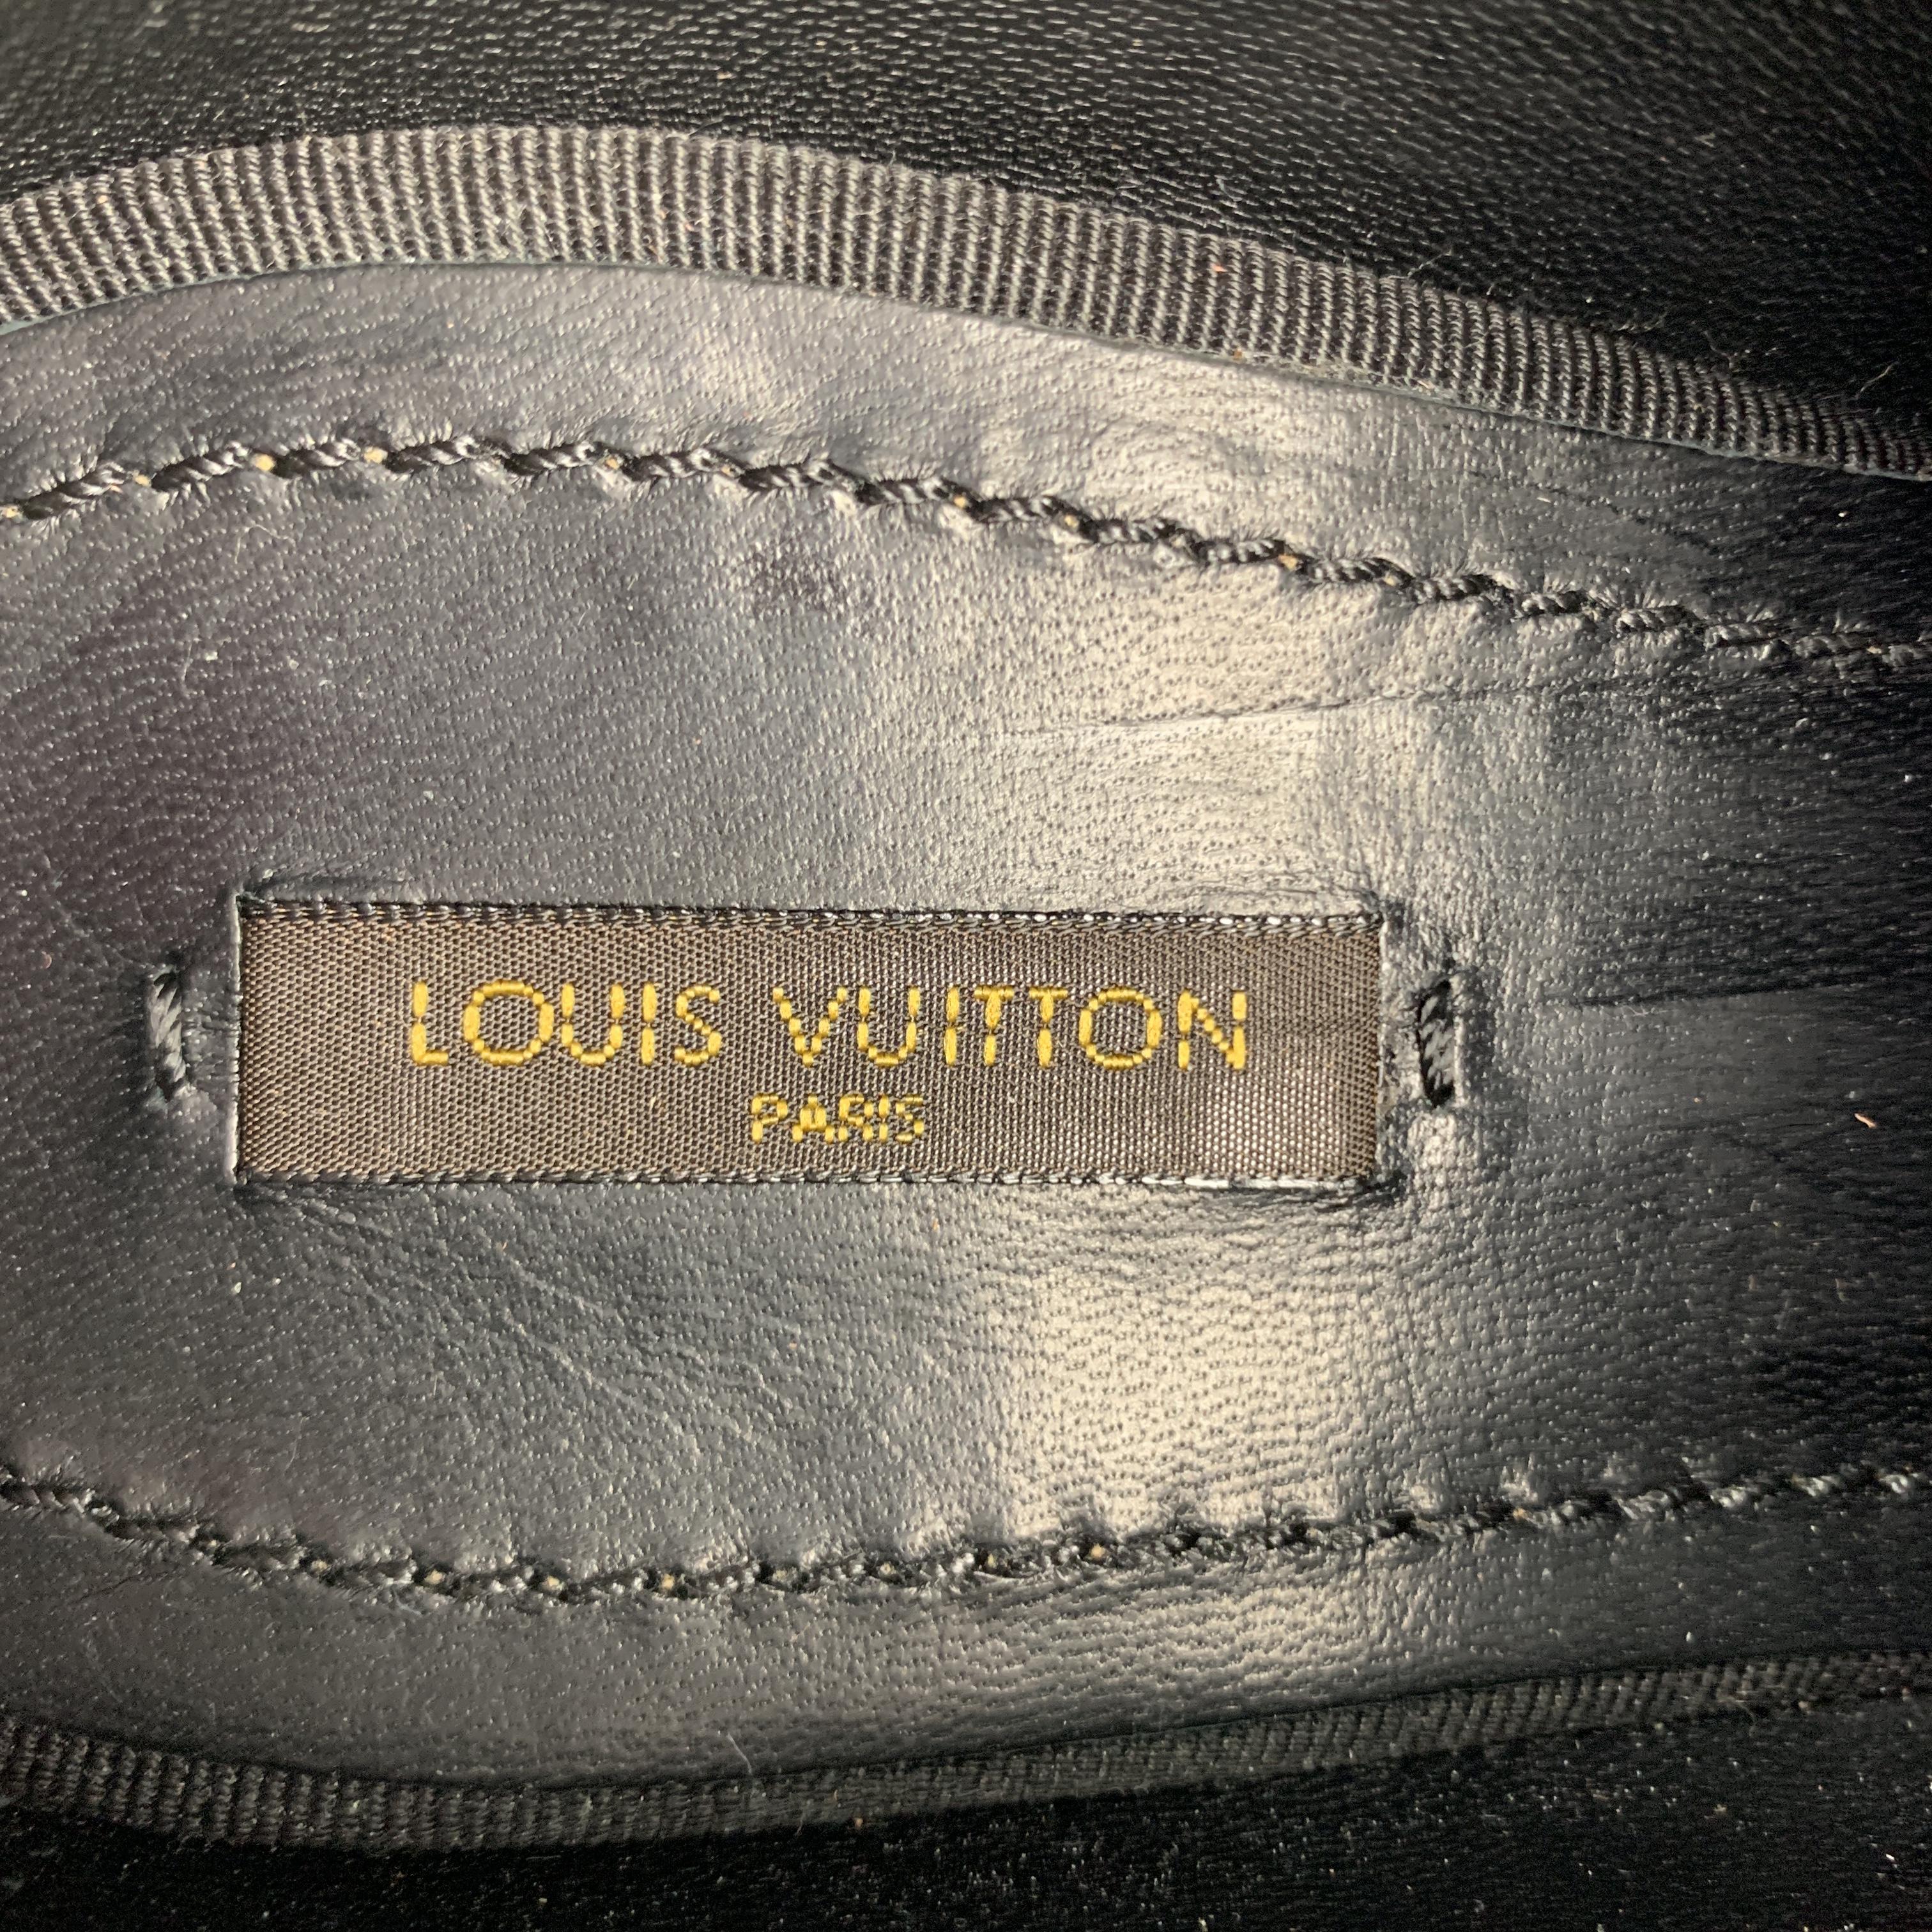 LOUIS VUITTON Size 11 Perforated Black Lace Up Shoe 4